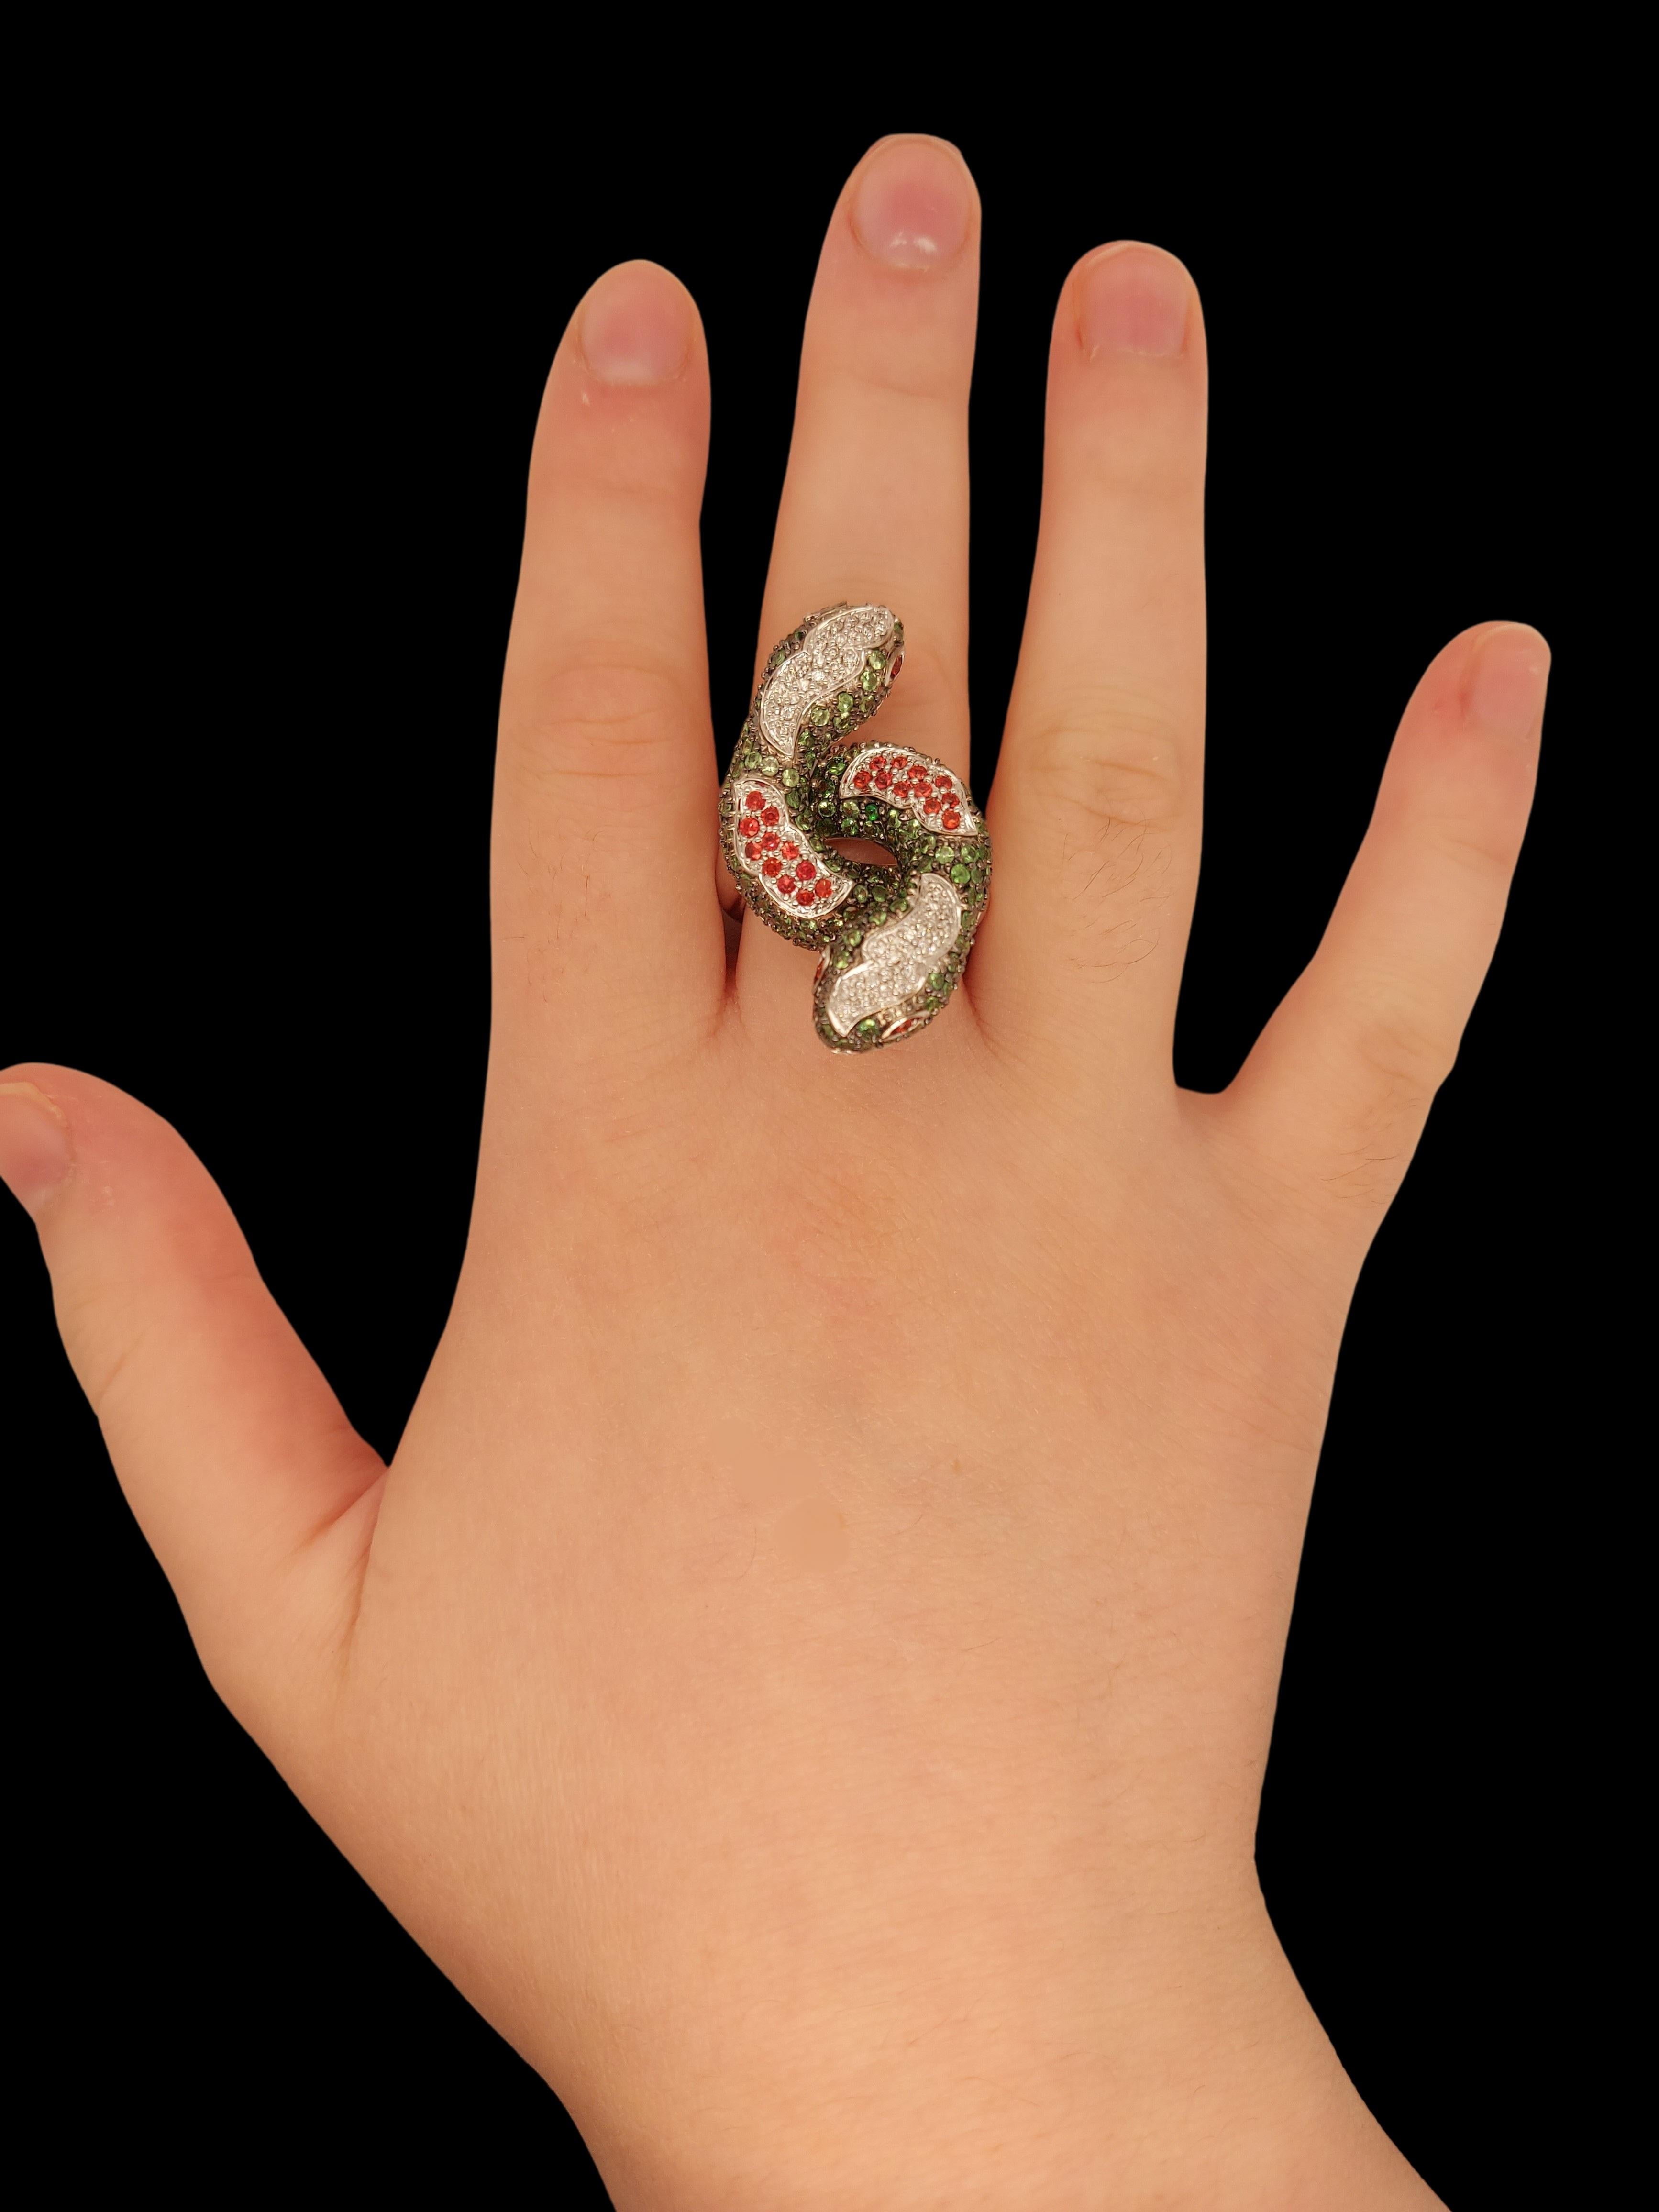 Brilliant Cut Gorgeous 18kt White Gold Double Snake Ring Set with Diamonds & Precious Stones For Sale